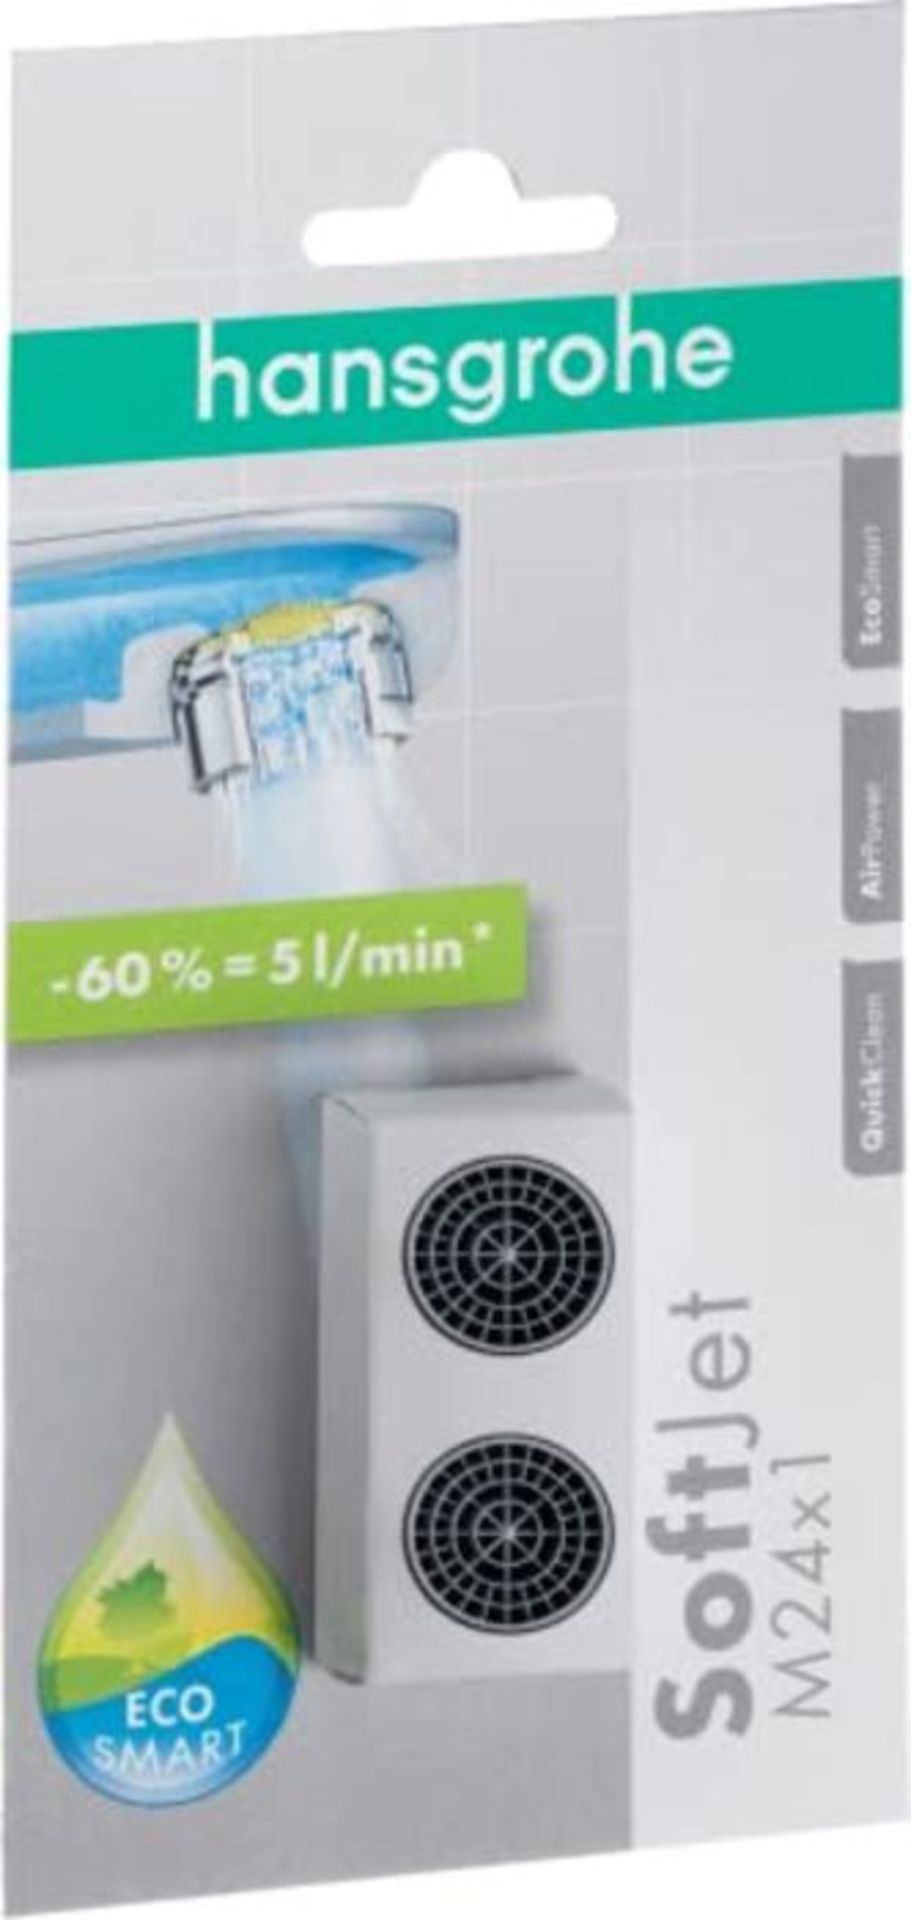 hansgrohe 13182000 SoftJet Aerator Set with Water dimmer 5 l/min Spare Parts, Mulitcol